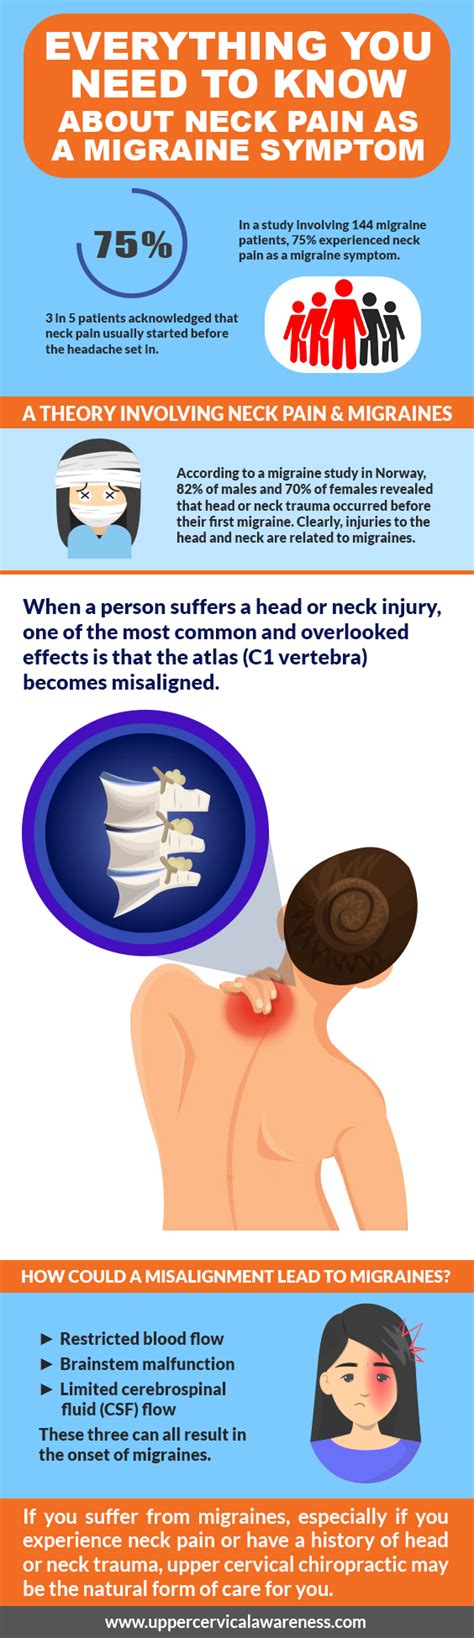 Everything About Neck Pain As A Migraine Symptom